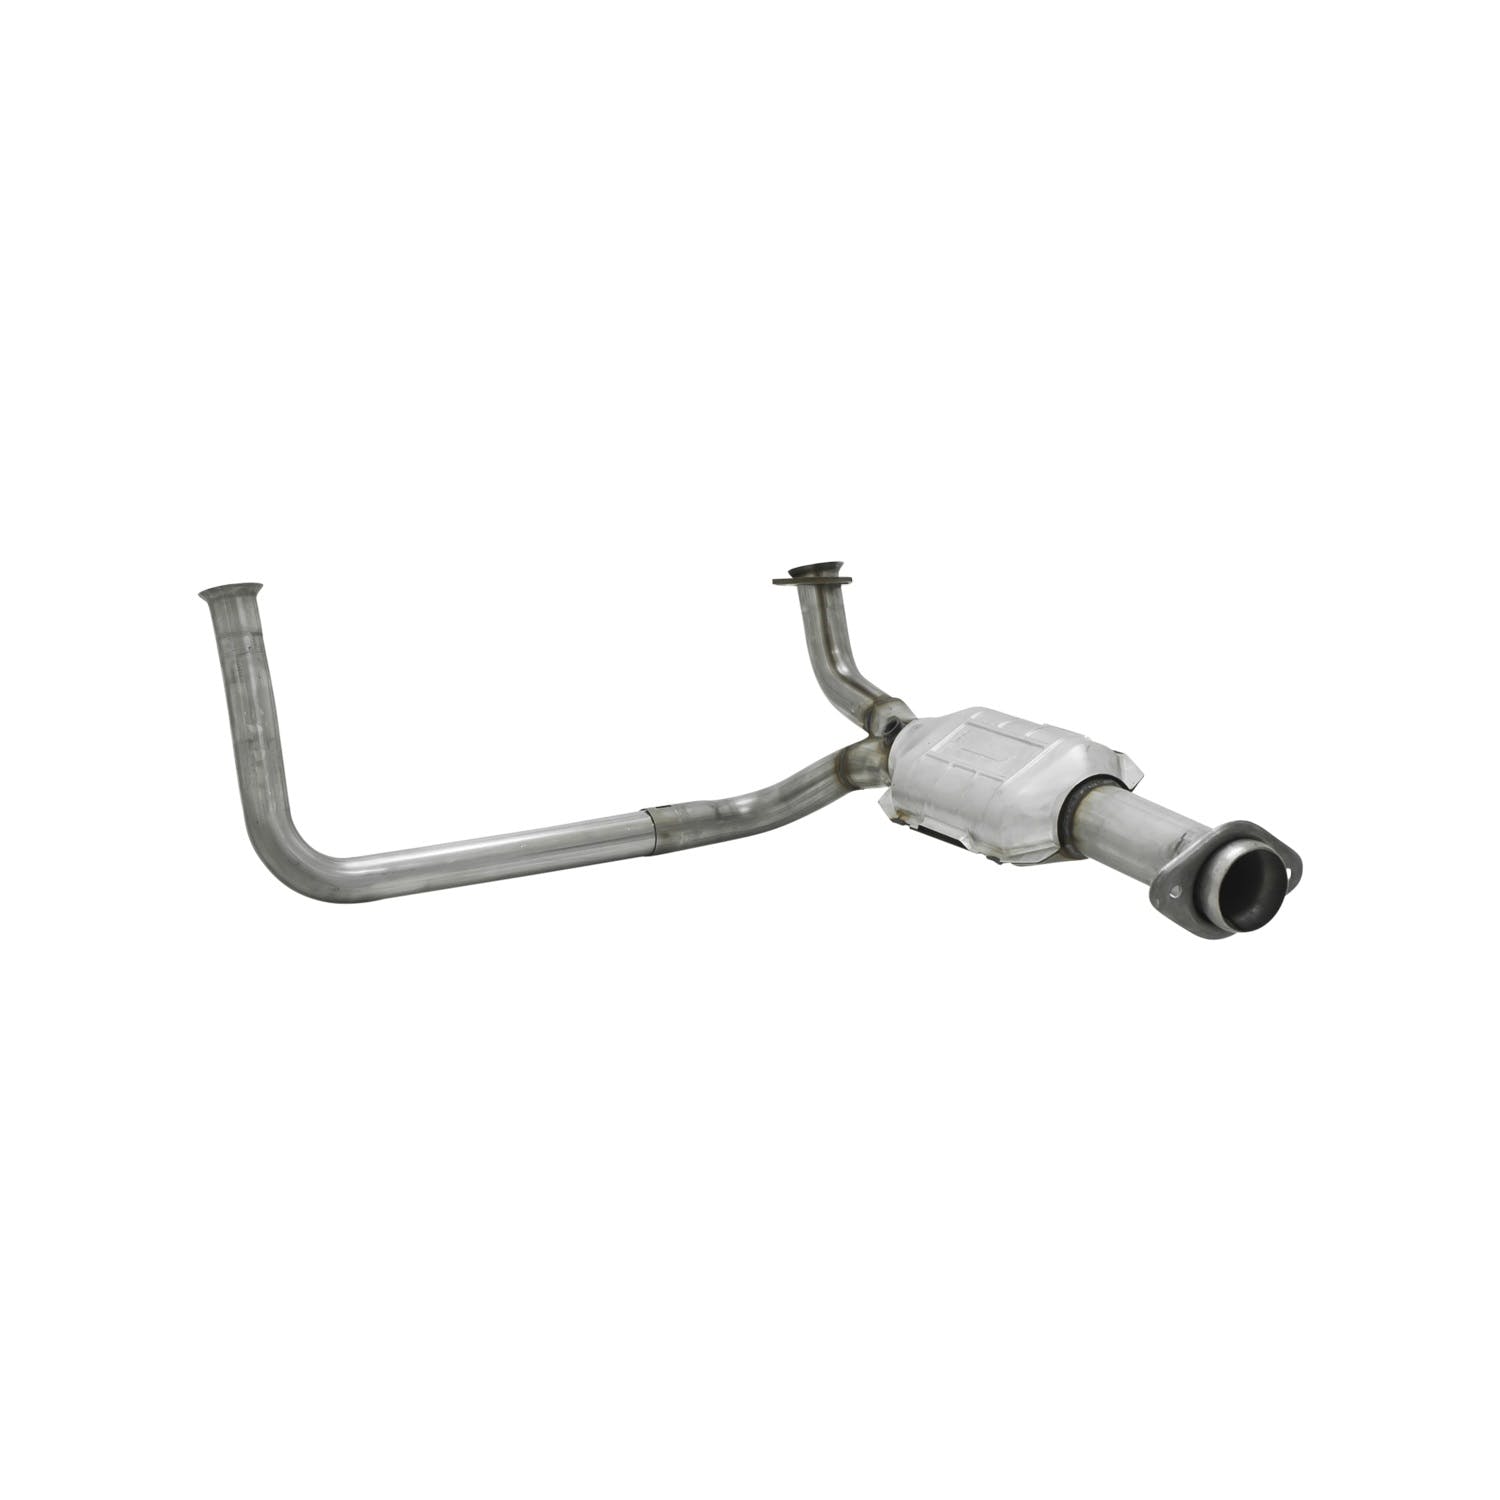 Flowmaster Catalytic Converters 2010021 Catalytic Converter-Direct Fit-3.00 in. Inlet/Outlet-49 State